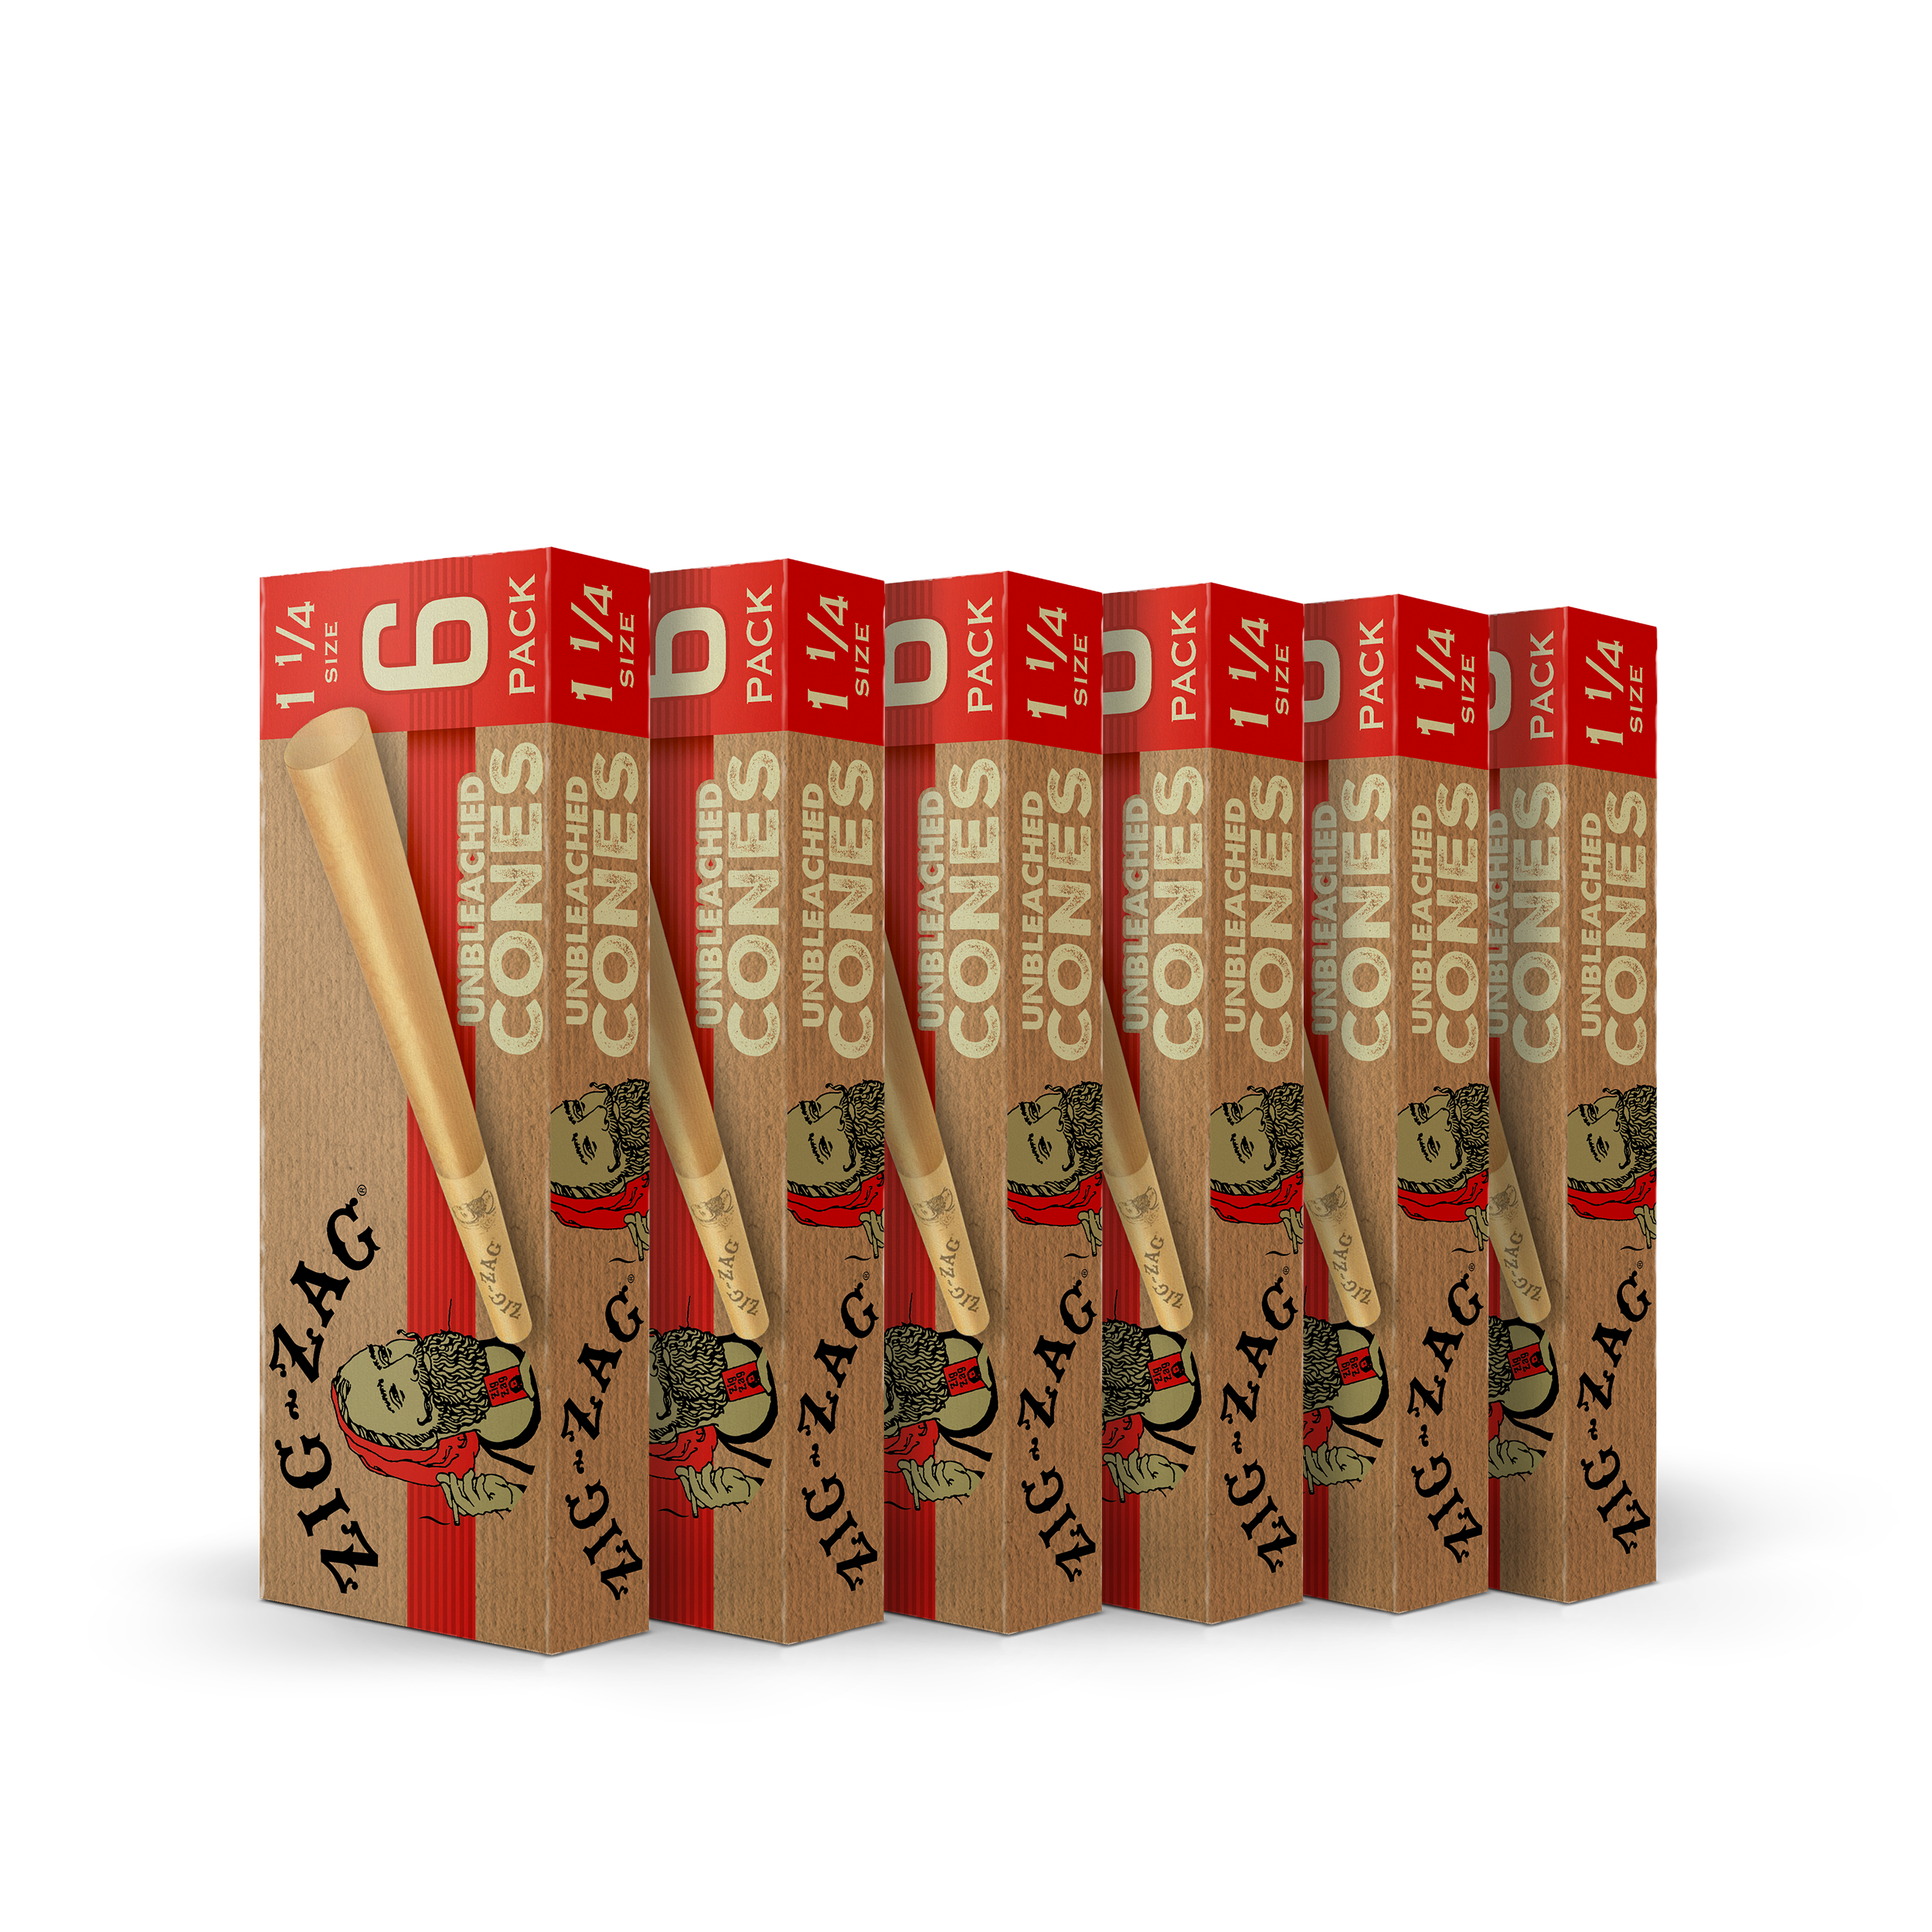 Zig-Zag® Unbleached Paper Cones 1 1/4 Size 100 Pack & Free Clipper Lighter